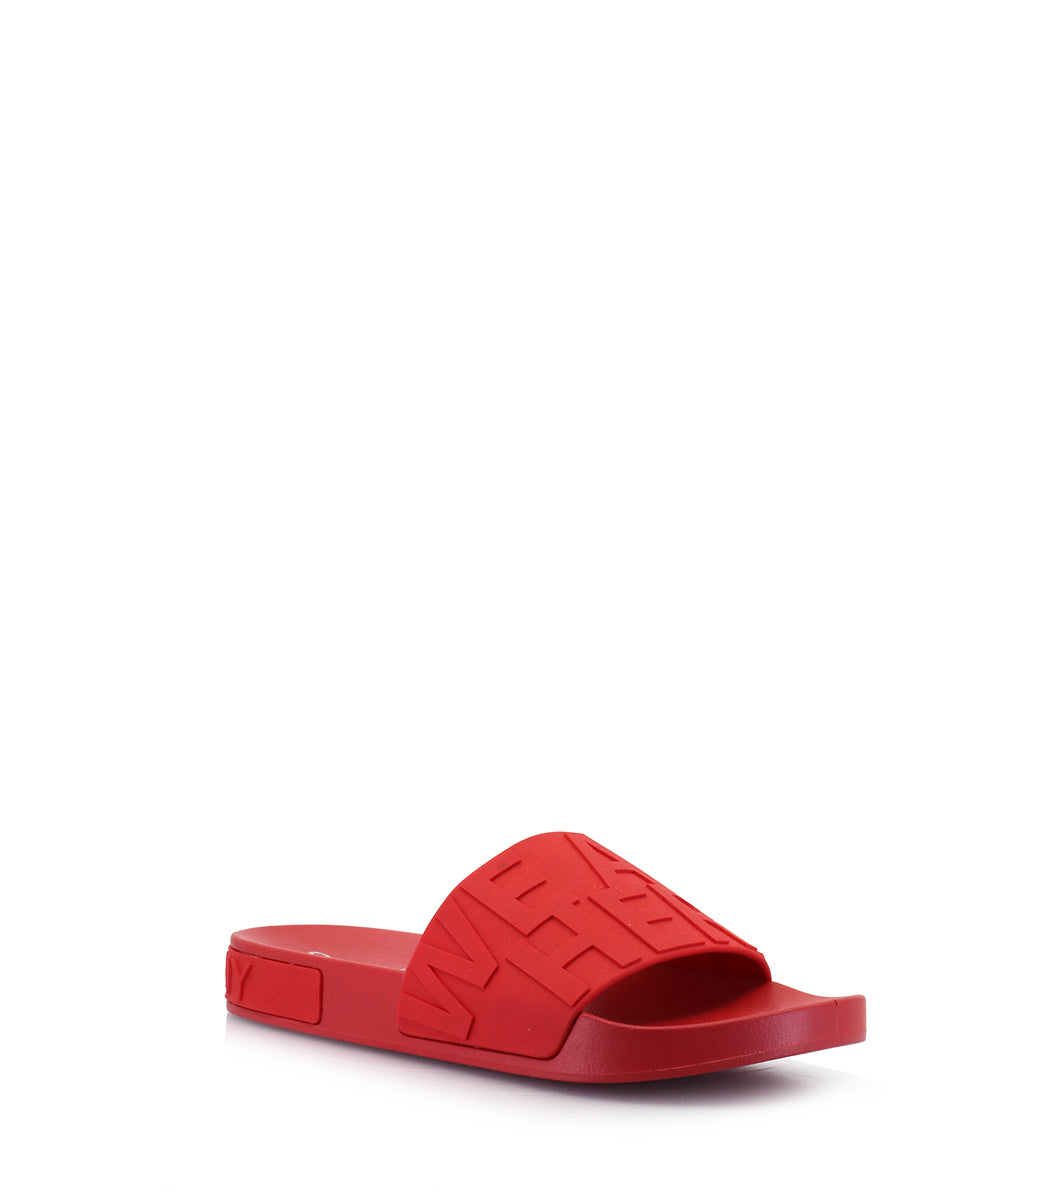 RICKY SARKANY, Here Platform Sandals Women - Red